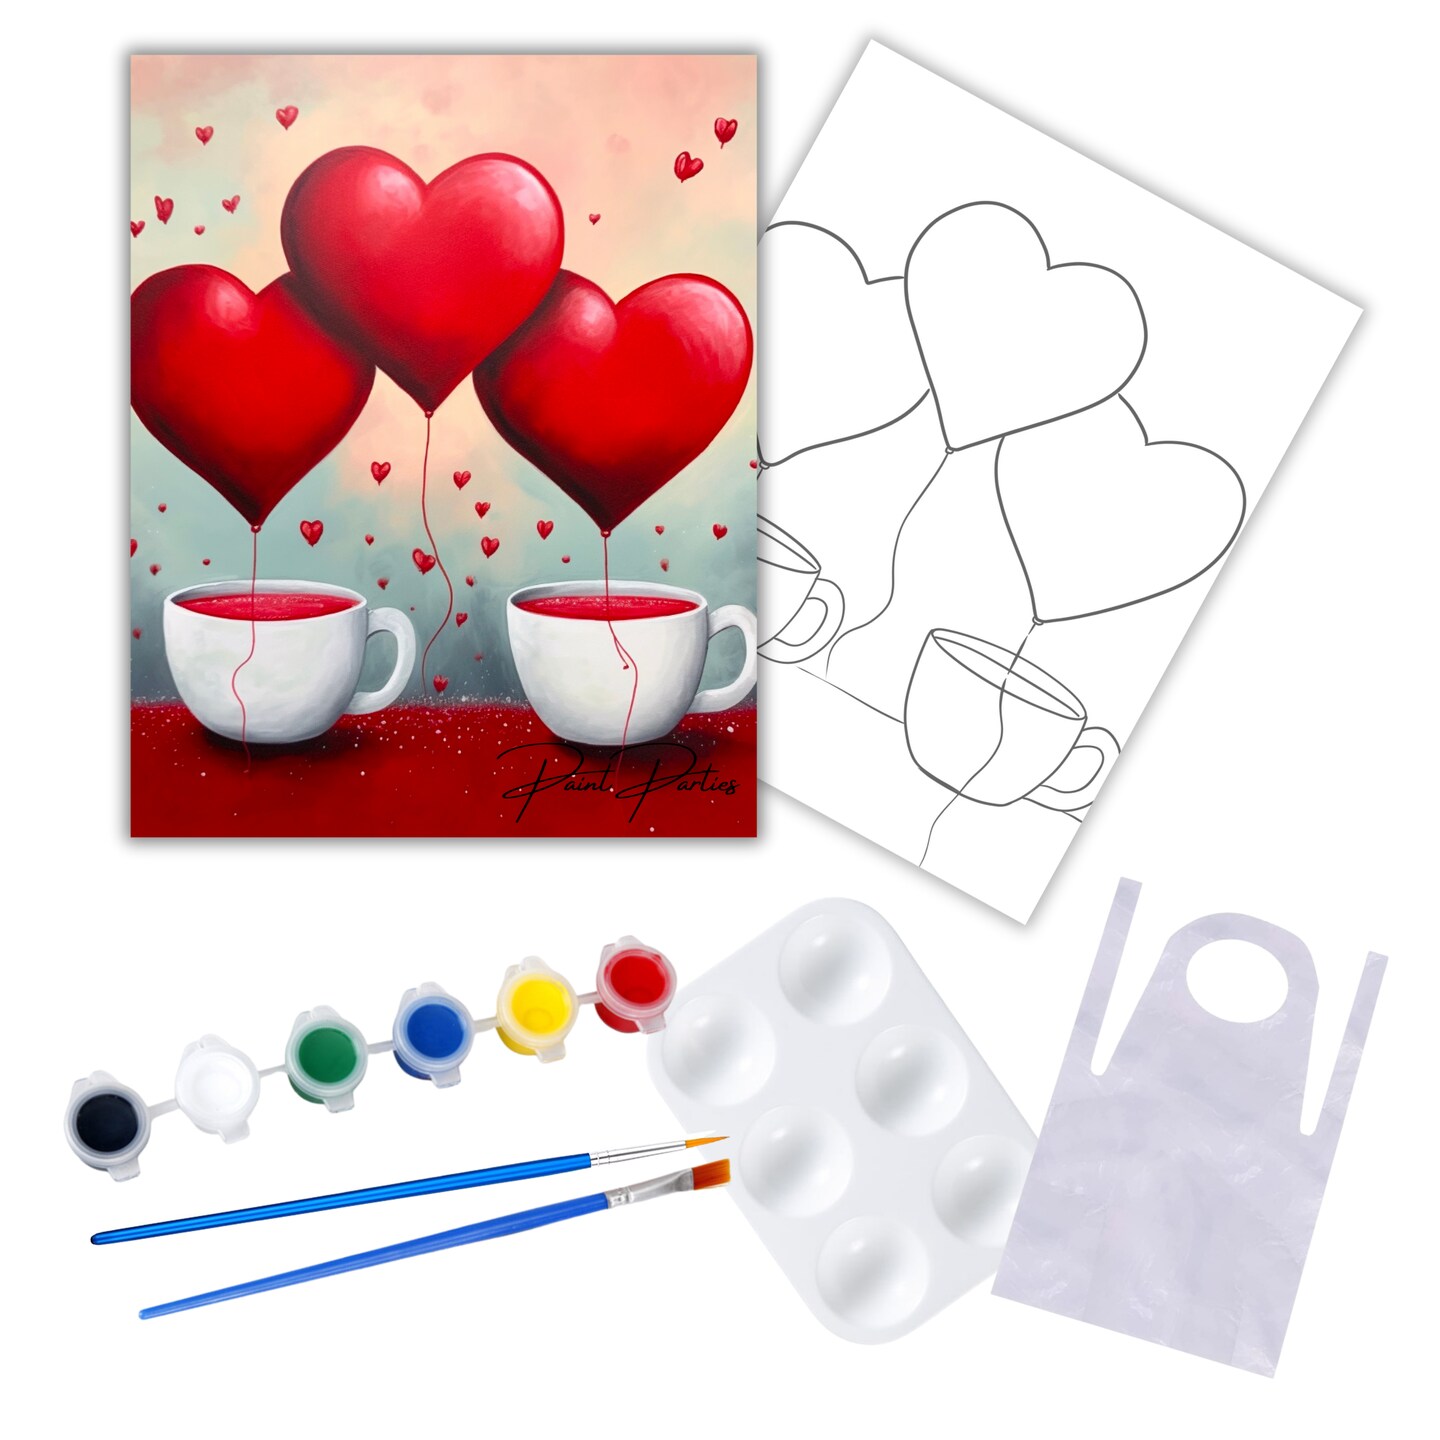 &#x22;Cup Of Hearts&#x22; DIY Canvas Art Kit, Adult Beginner, Acrylic Paint Size 11x14 inch